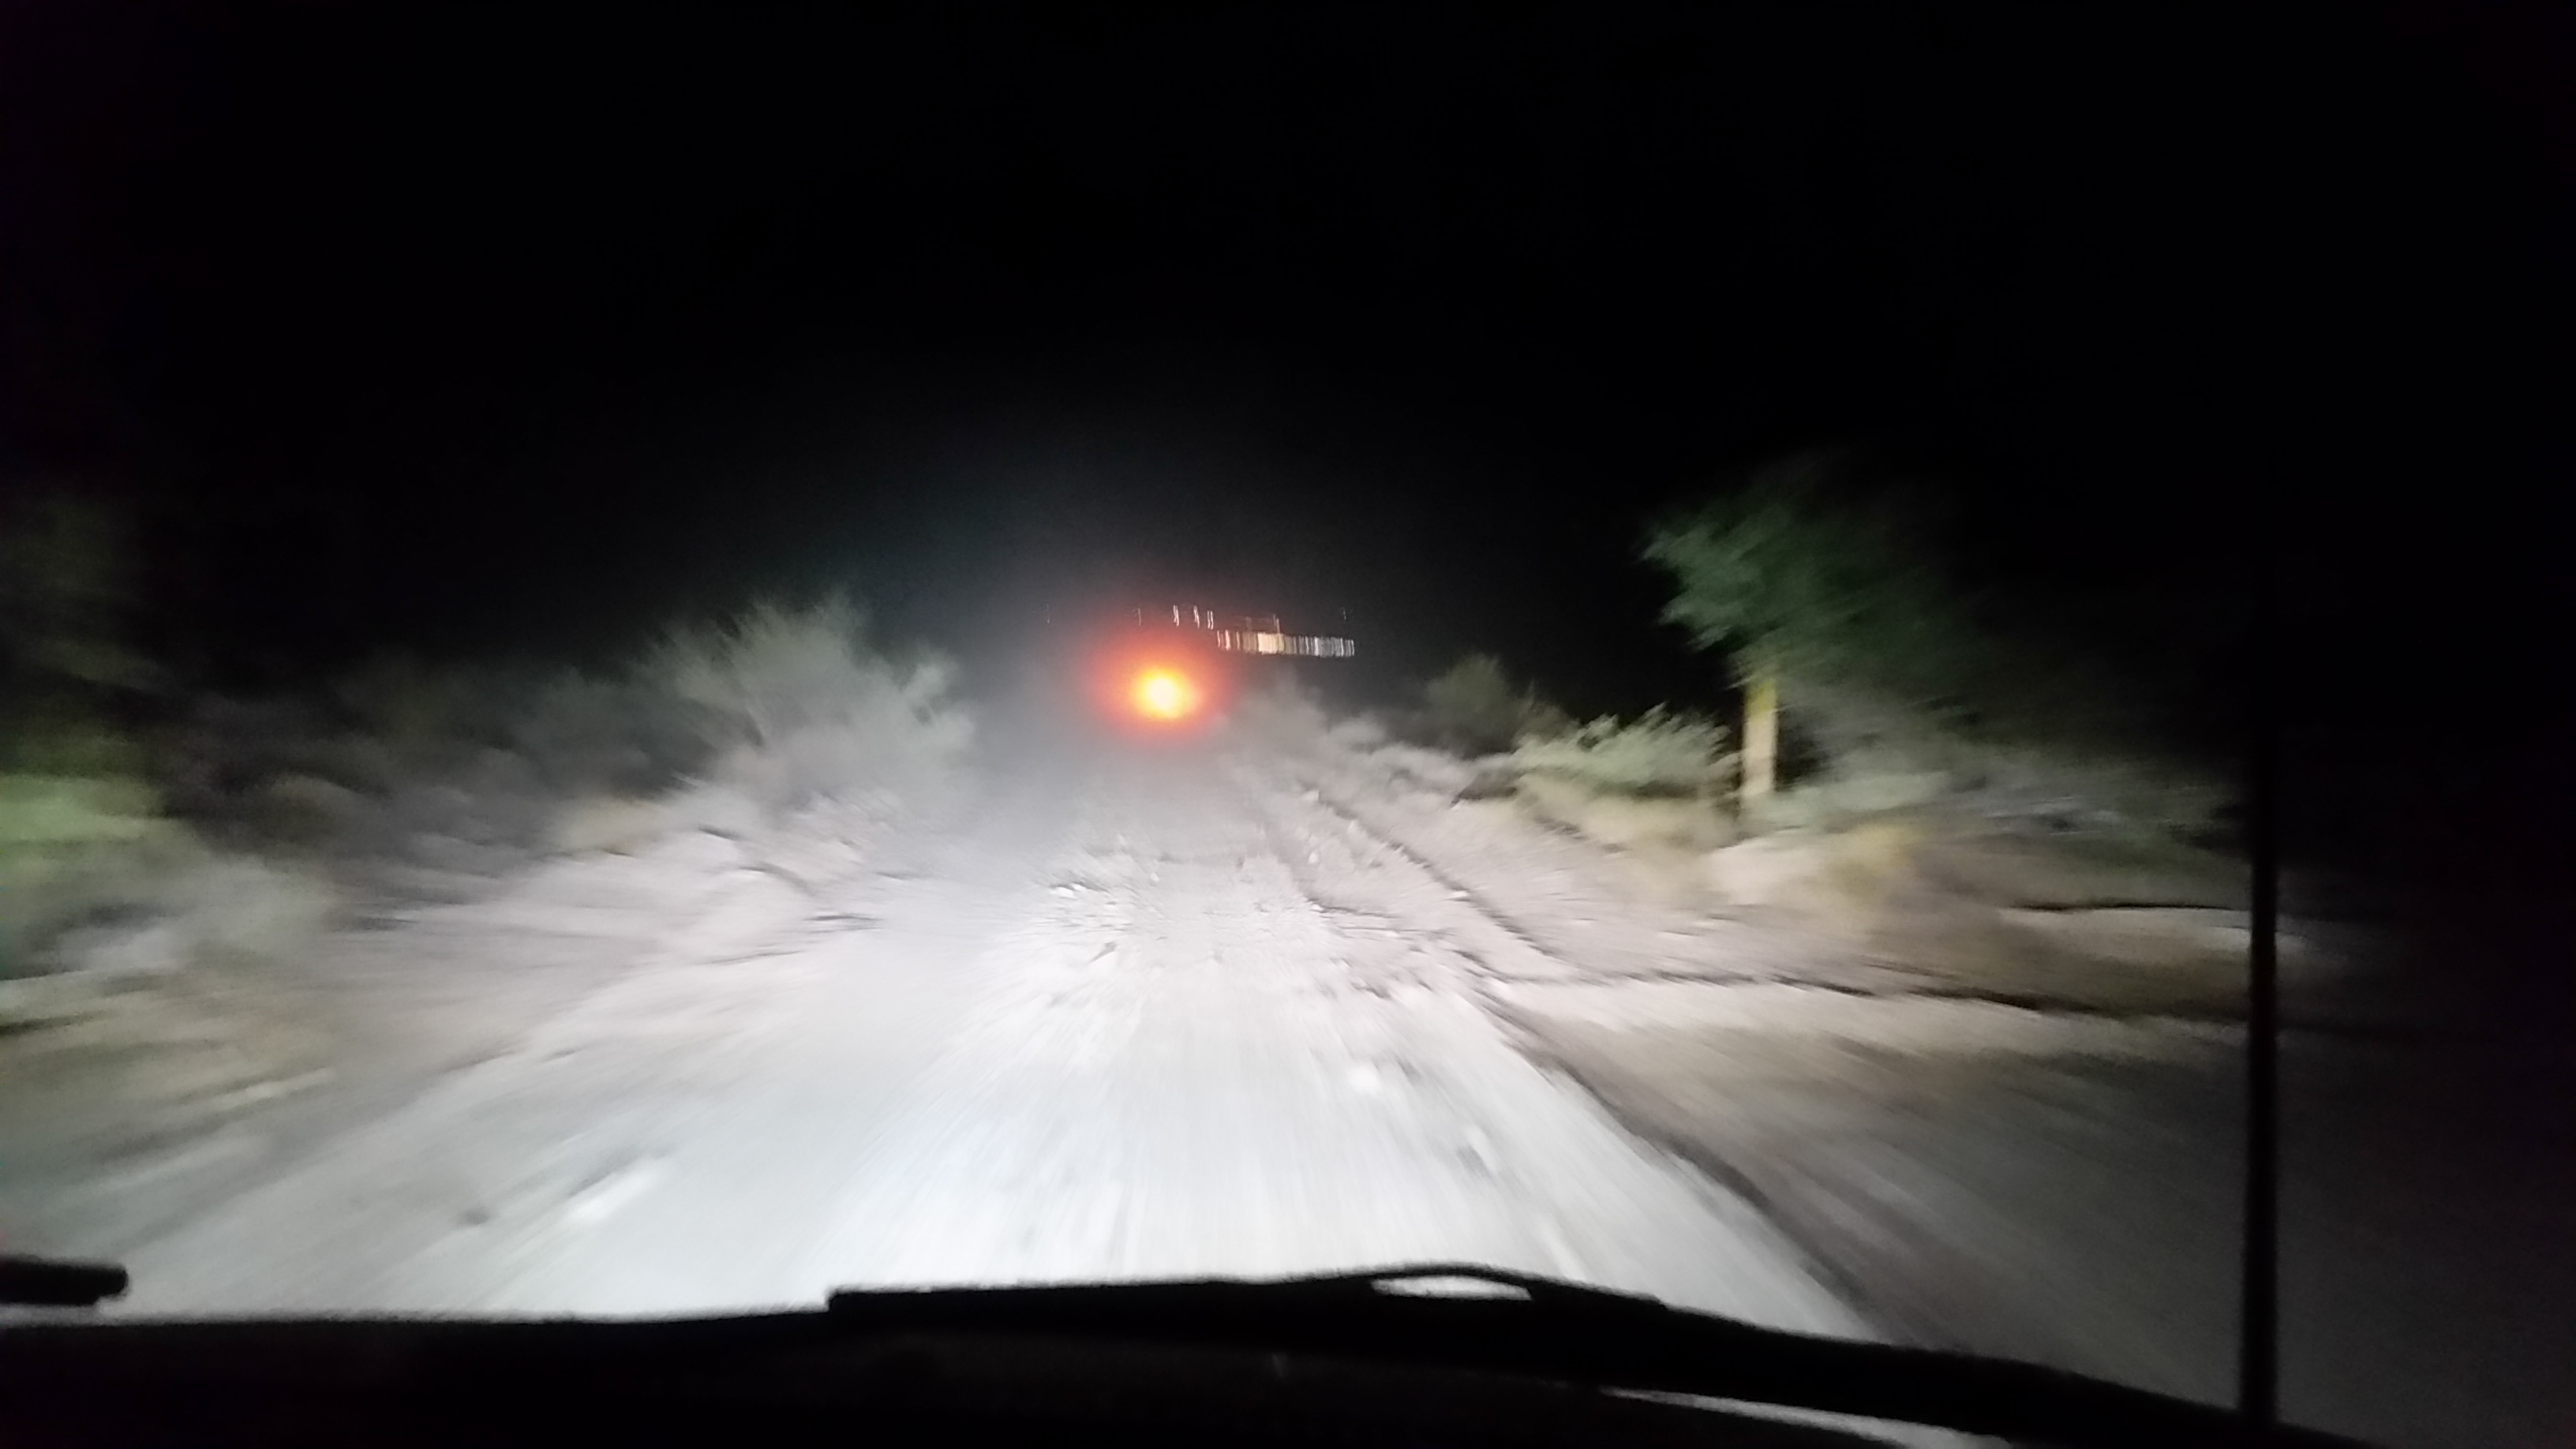 Heading into Primm at night with the HID projectors on high and the 27" led light bar on